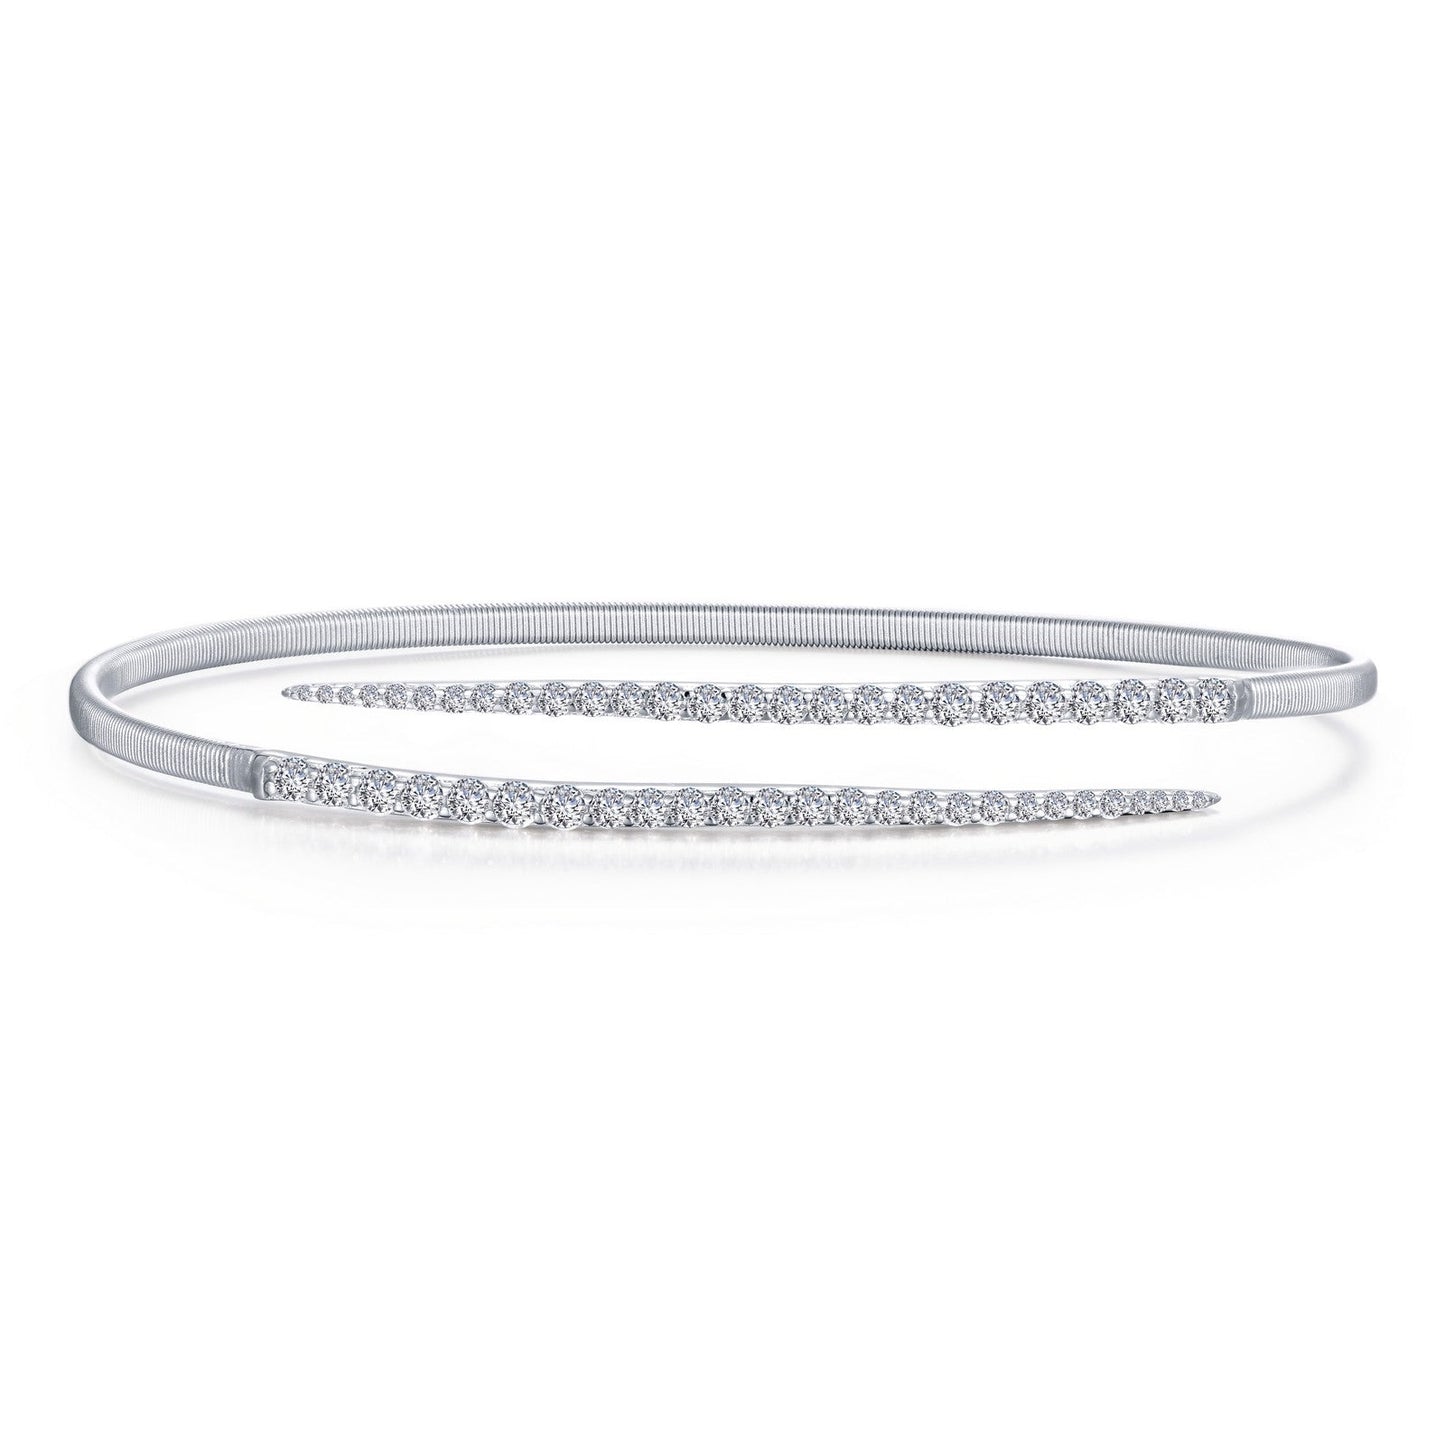 Load image into Gallery viewer, Lafonn Bypass Bangle Bracelet 52 Stone Count B0123CLP72
